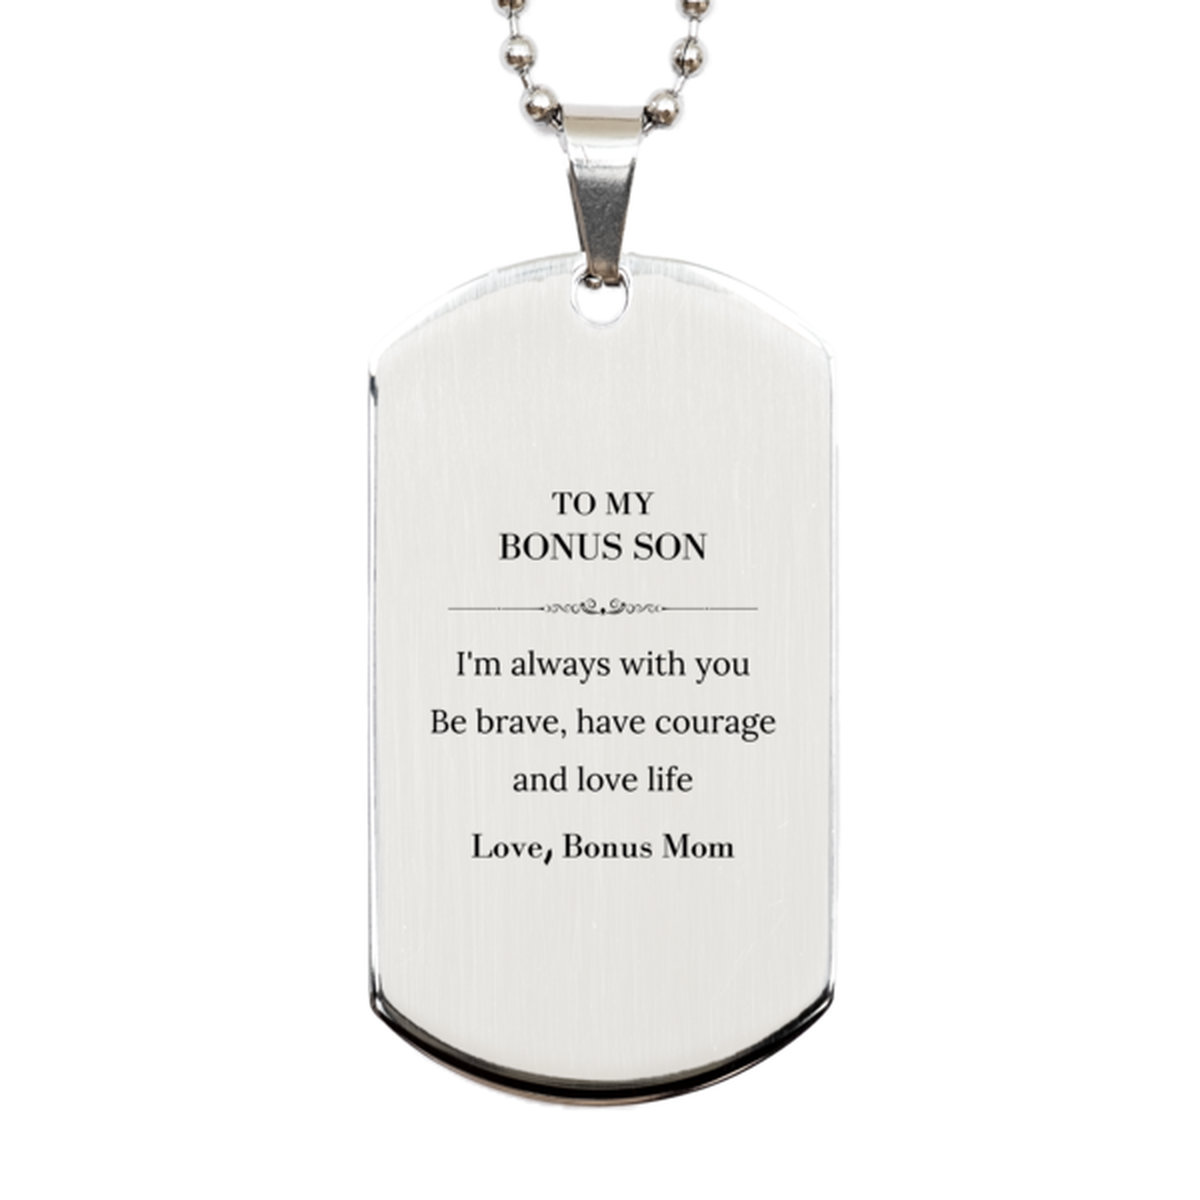 To My Bonus Son Gifts from Bonus Mom, Unique Silver Dog Tag Inspirational Christmas Birthday Graduation Gifts for Bonus Son I'm always with you. Be brave, have courage and love life. Love, Bonus Mom